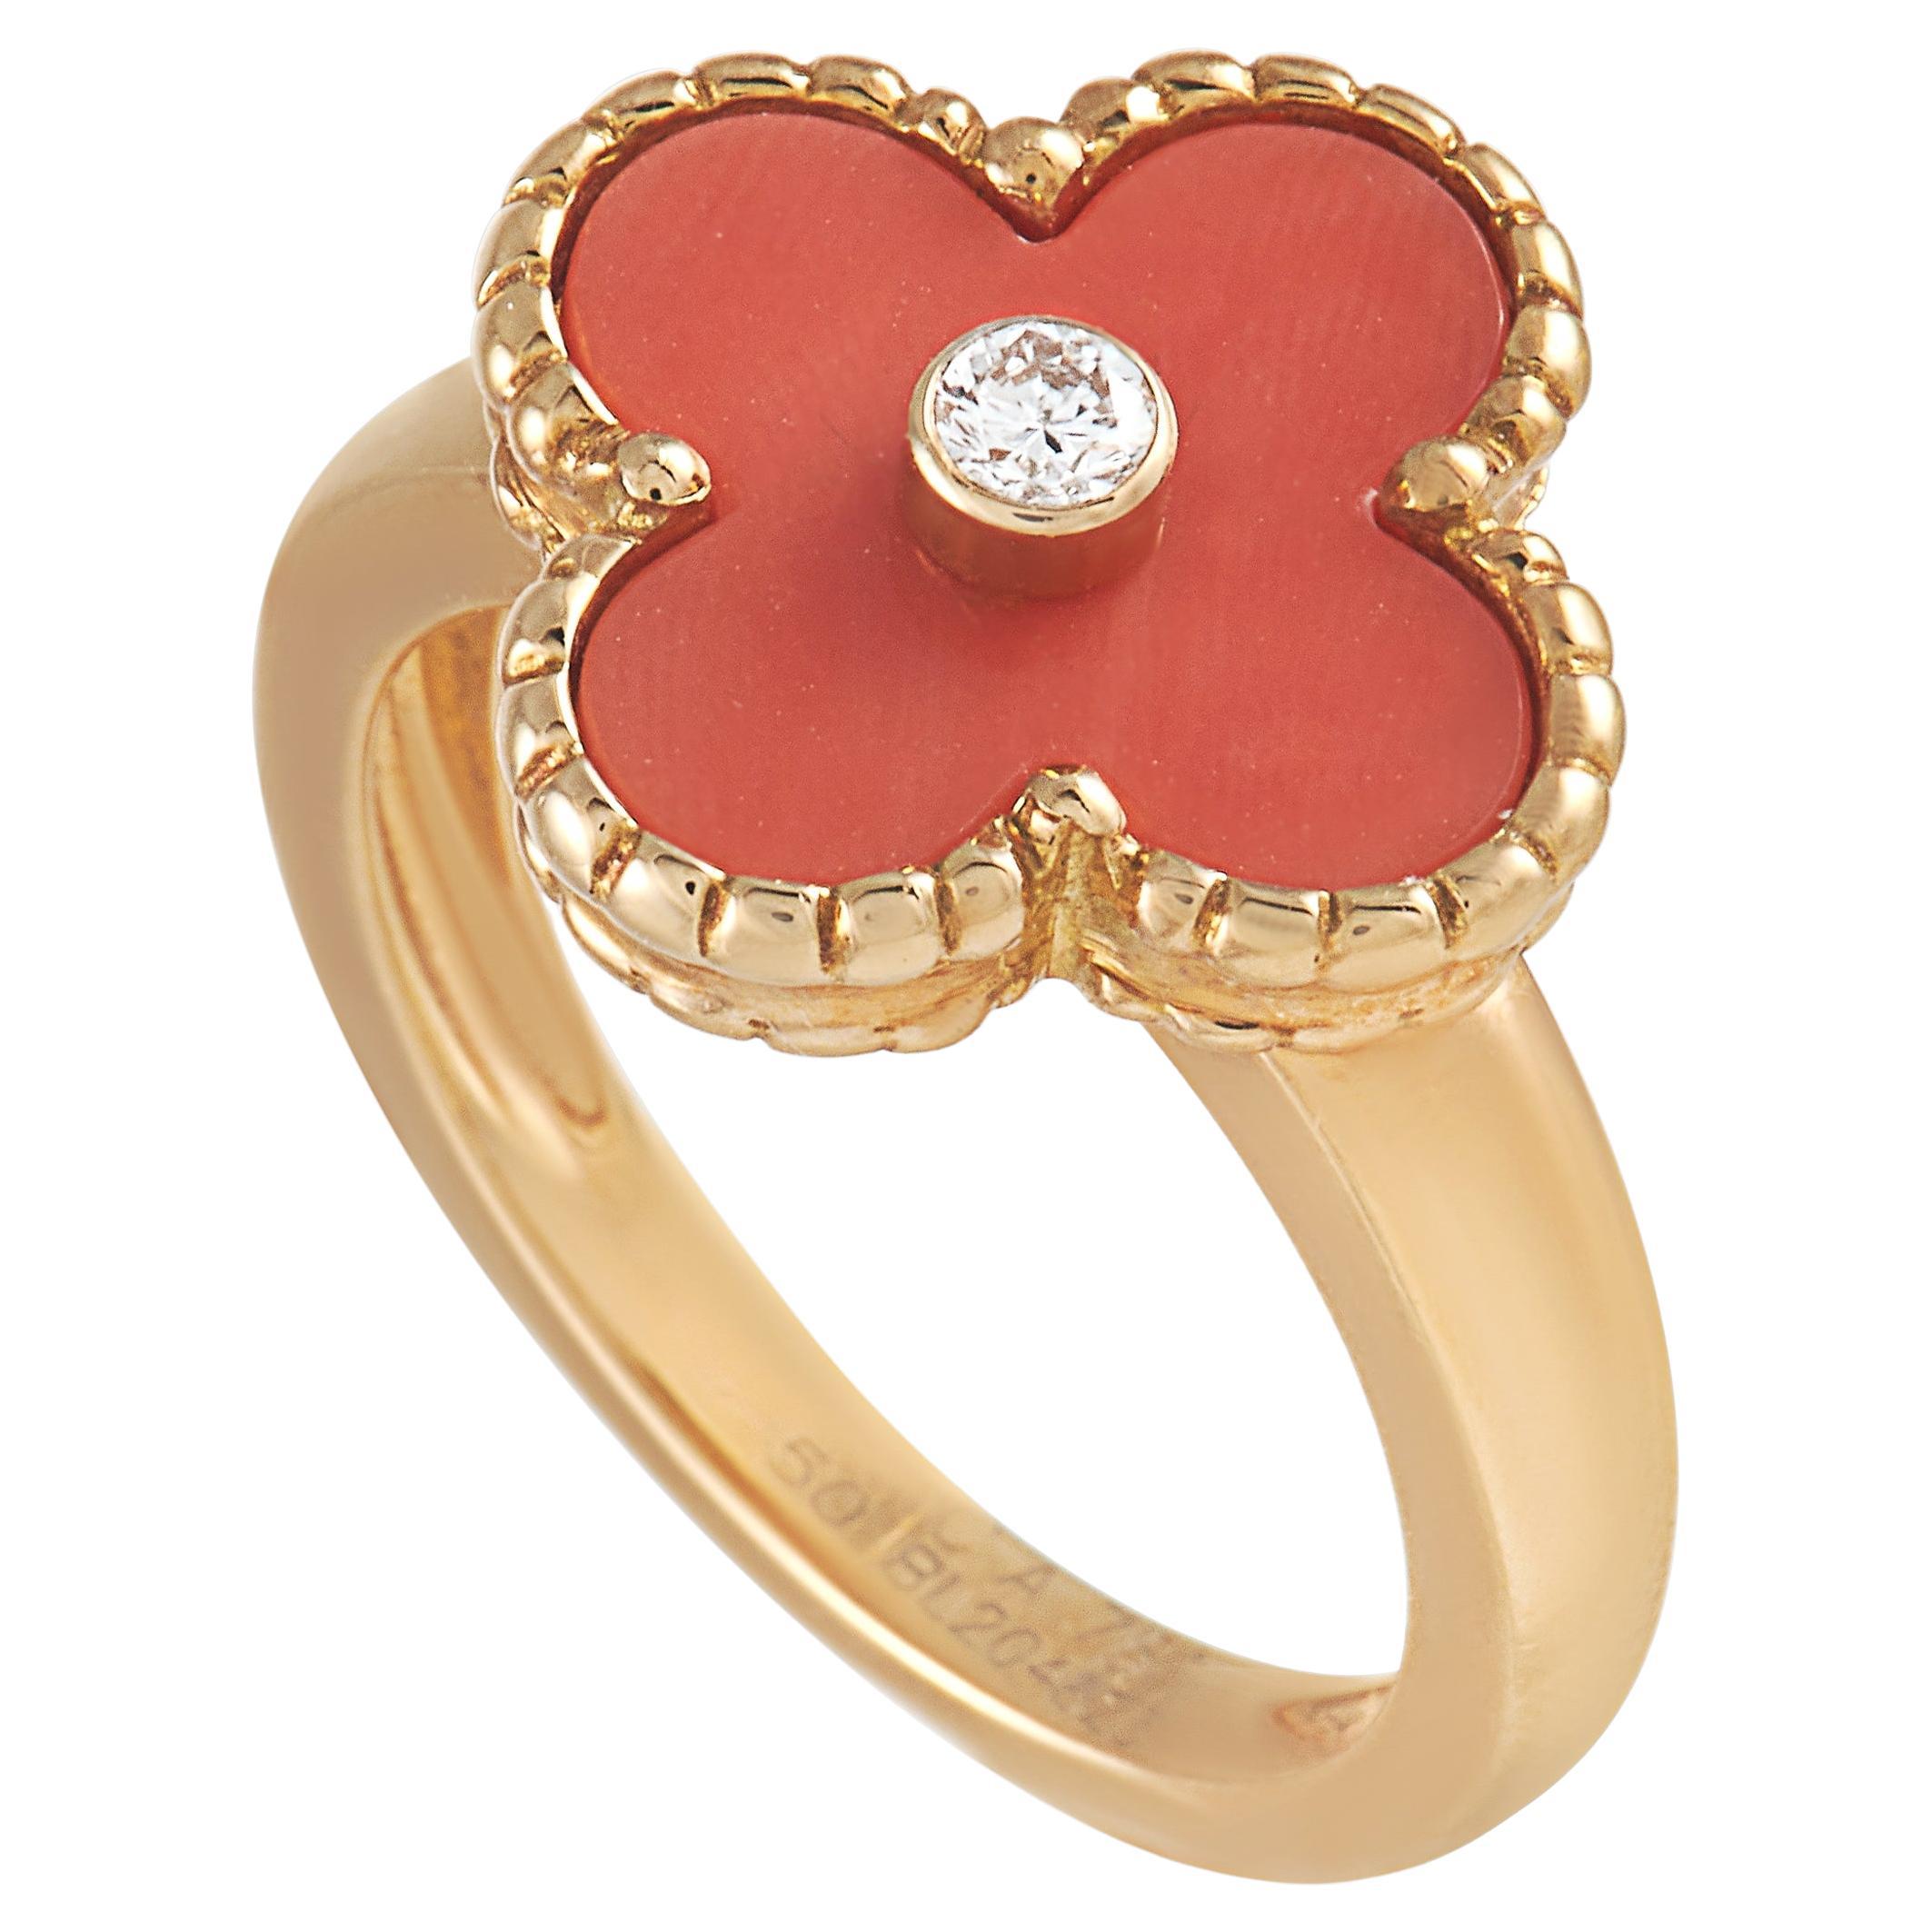 Van Cleef & Arpels Alhambra 18K Yellow Gold Diamond and Coral Ring